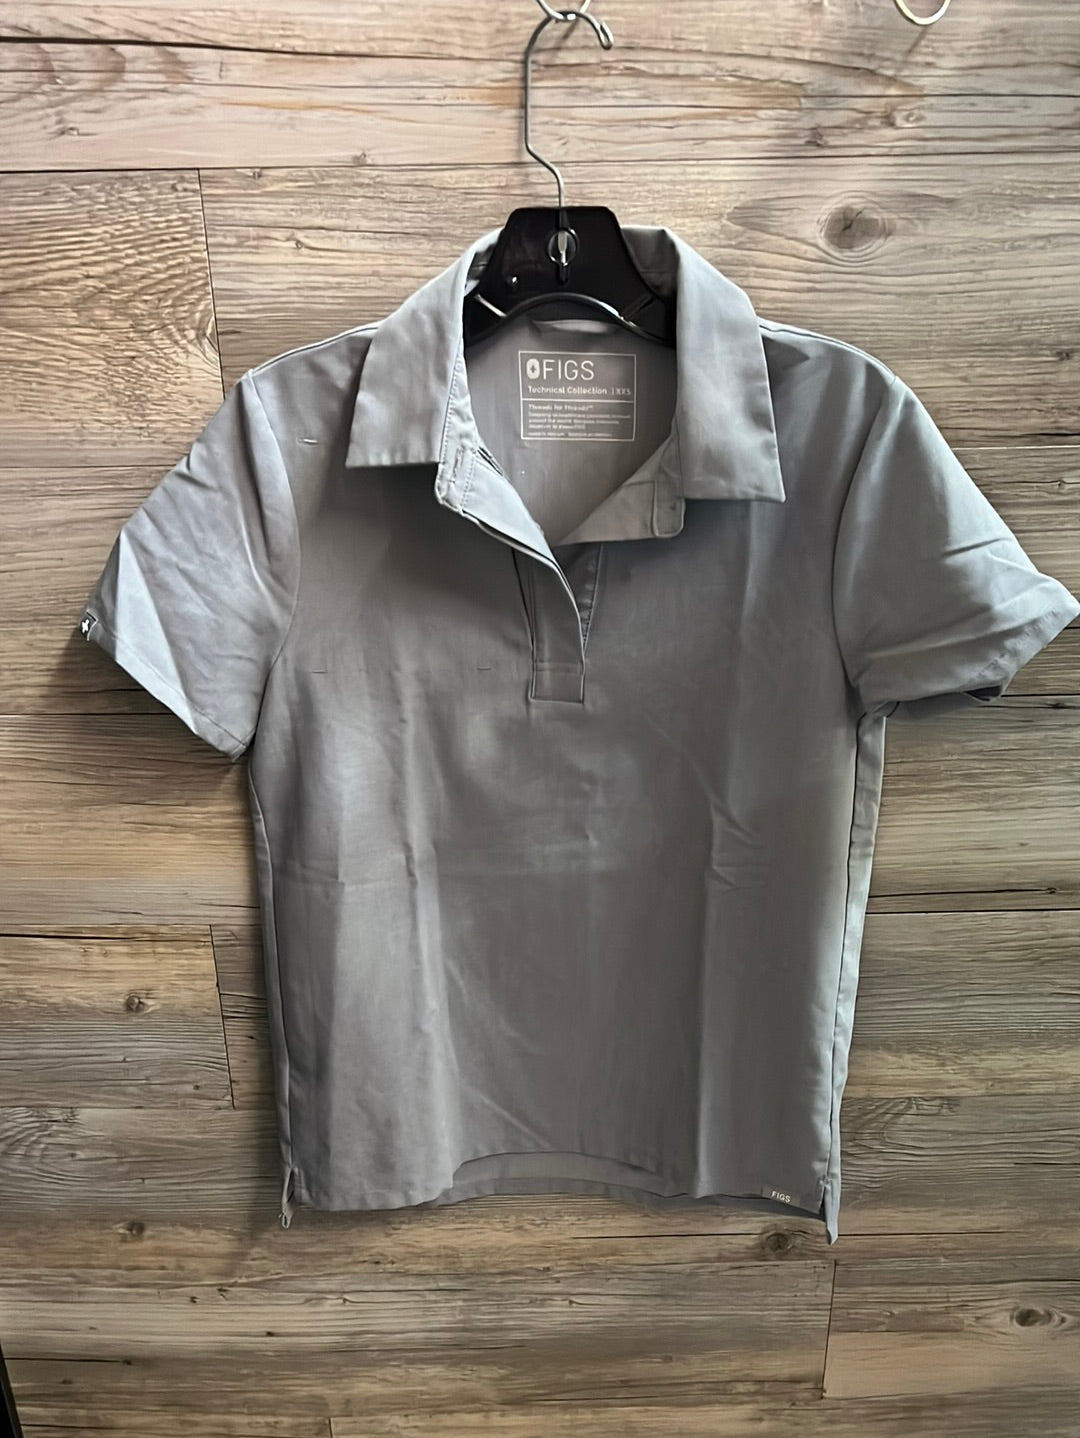 Figs Technical Collection Grey Shirt, Size XXS